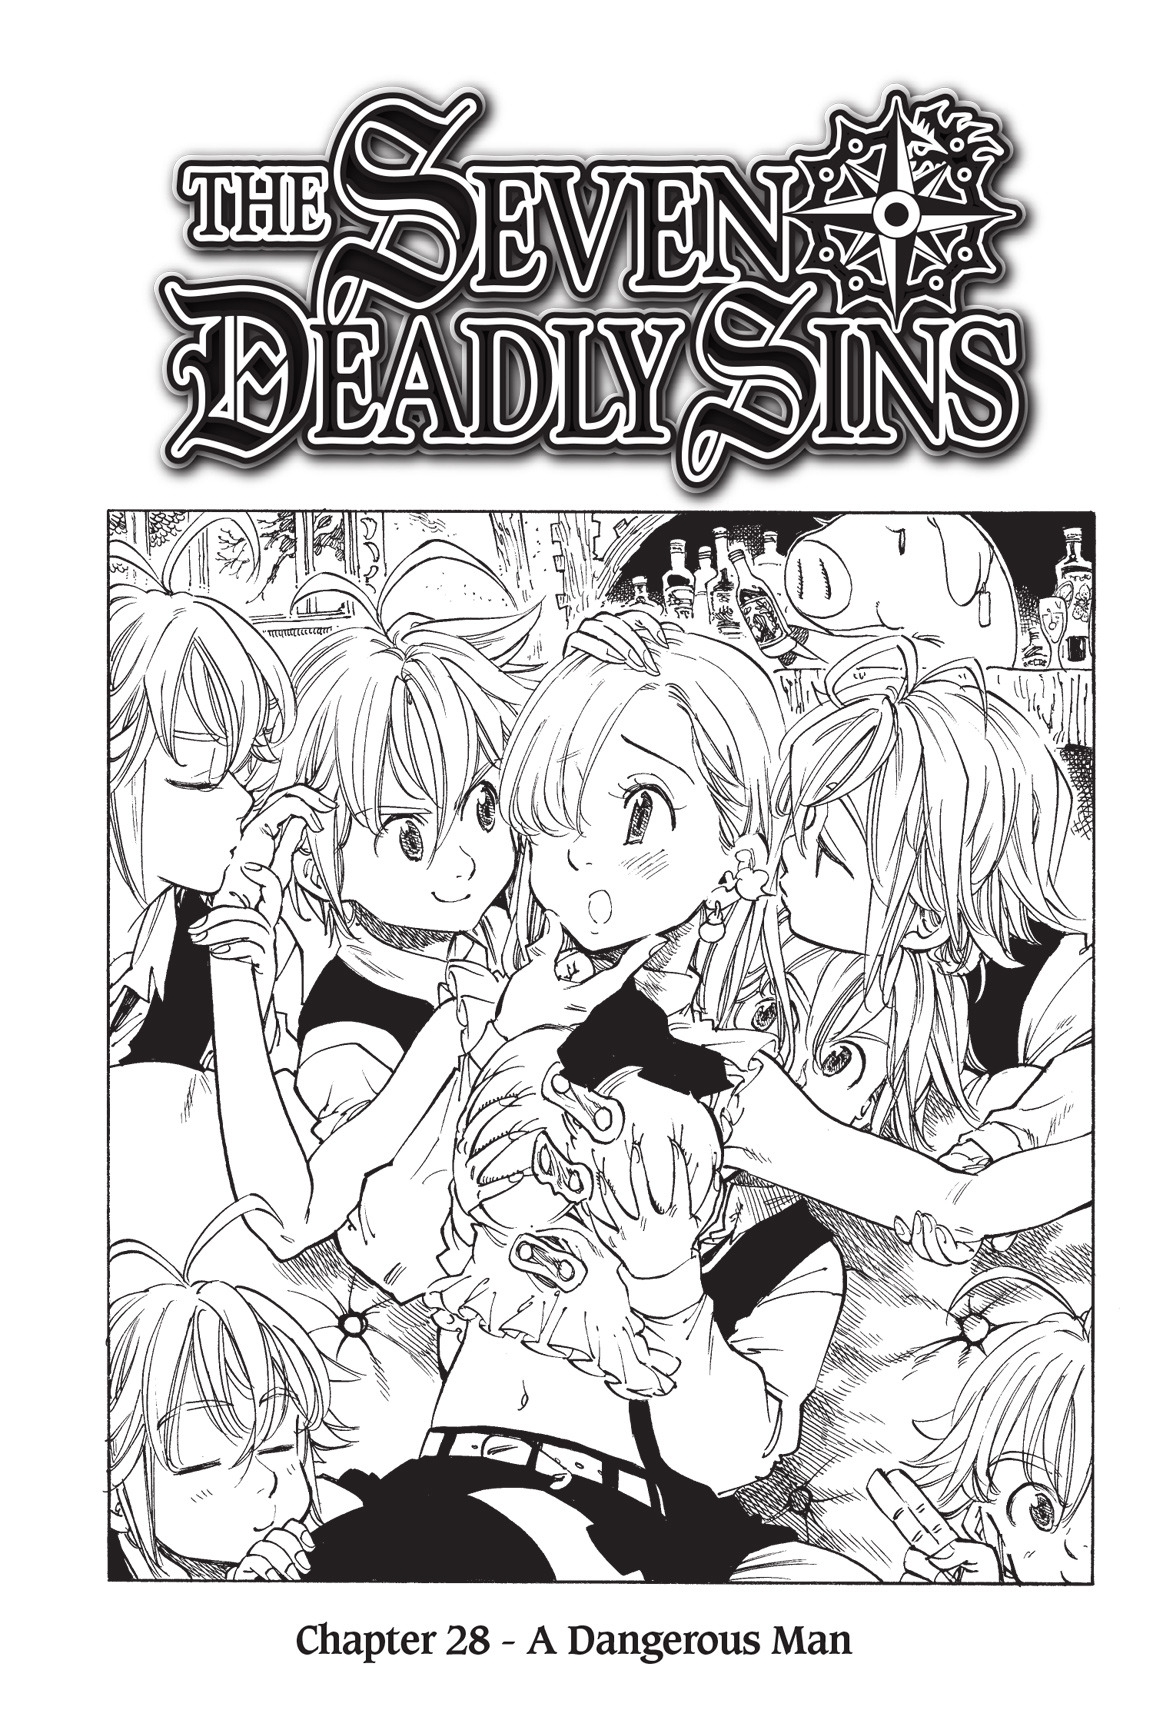 The Seven Deadly Sins (Covers & Chapter Title Cards) 61